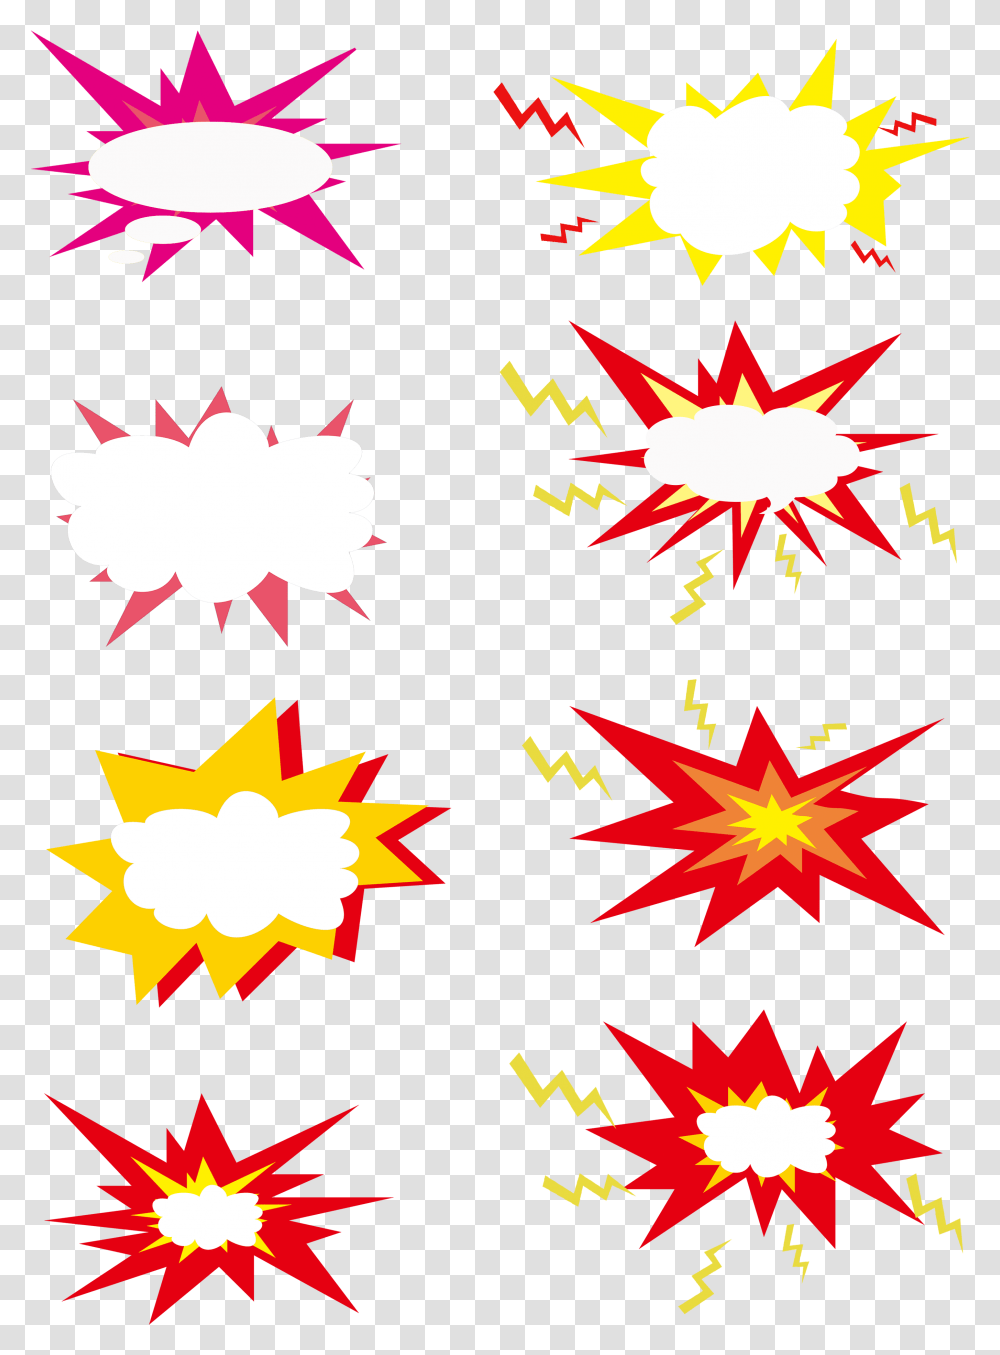 Explosion Clouds Simple Red And Vector Image, Leaf, Plant, Outdoors, Star Symbol Transparent Png